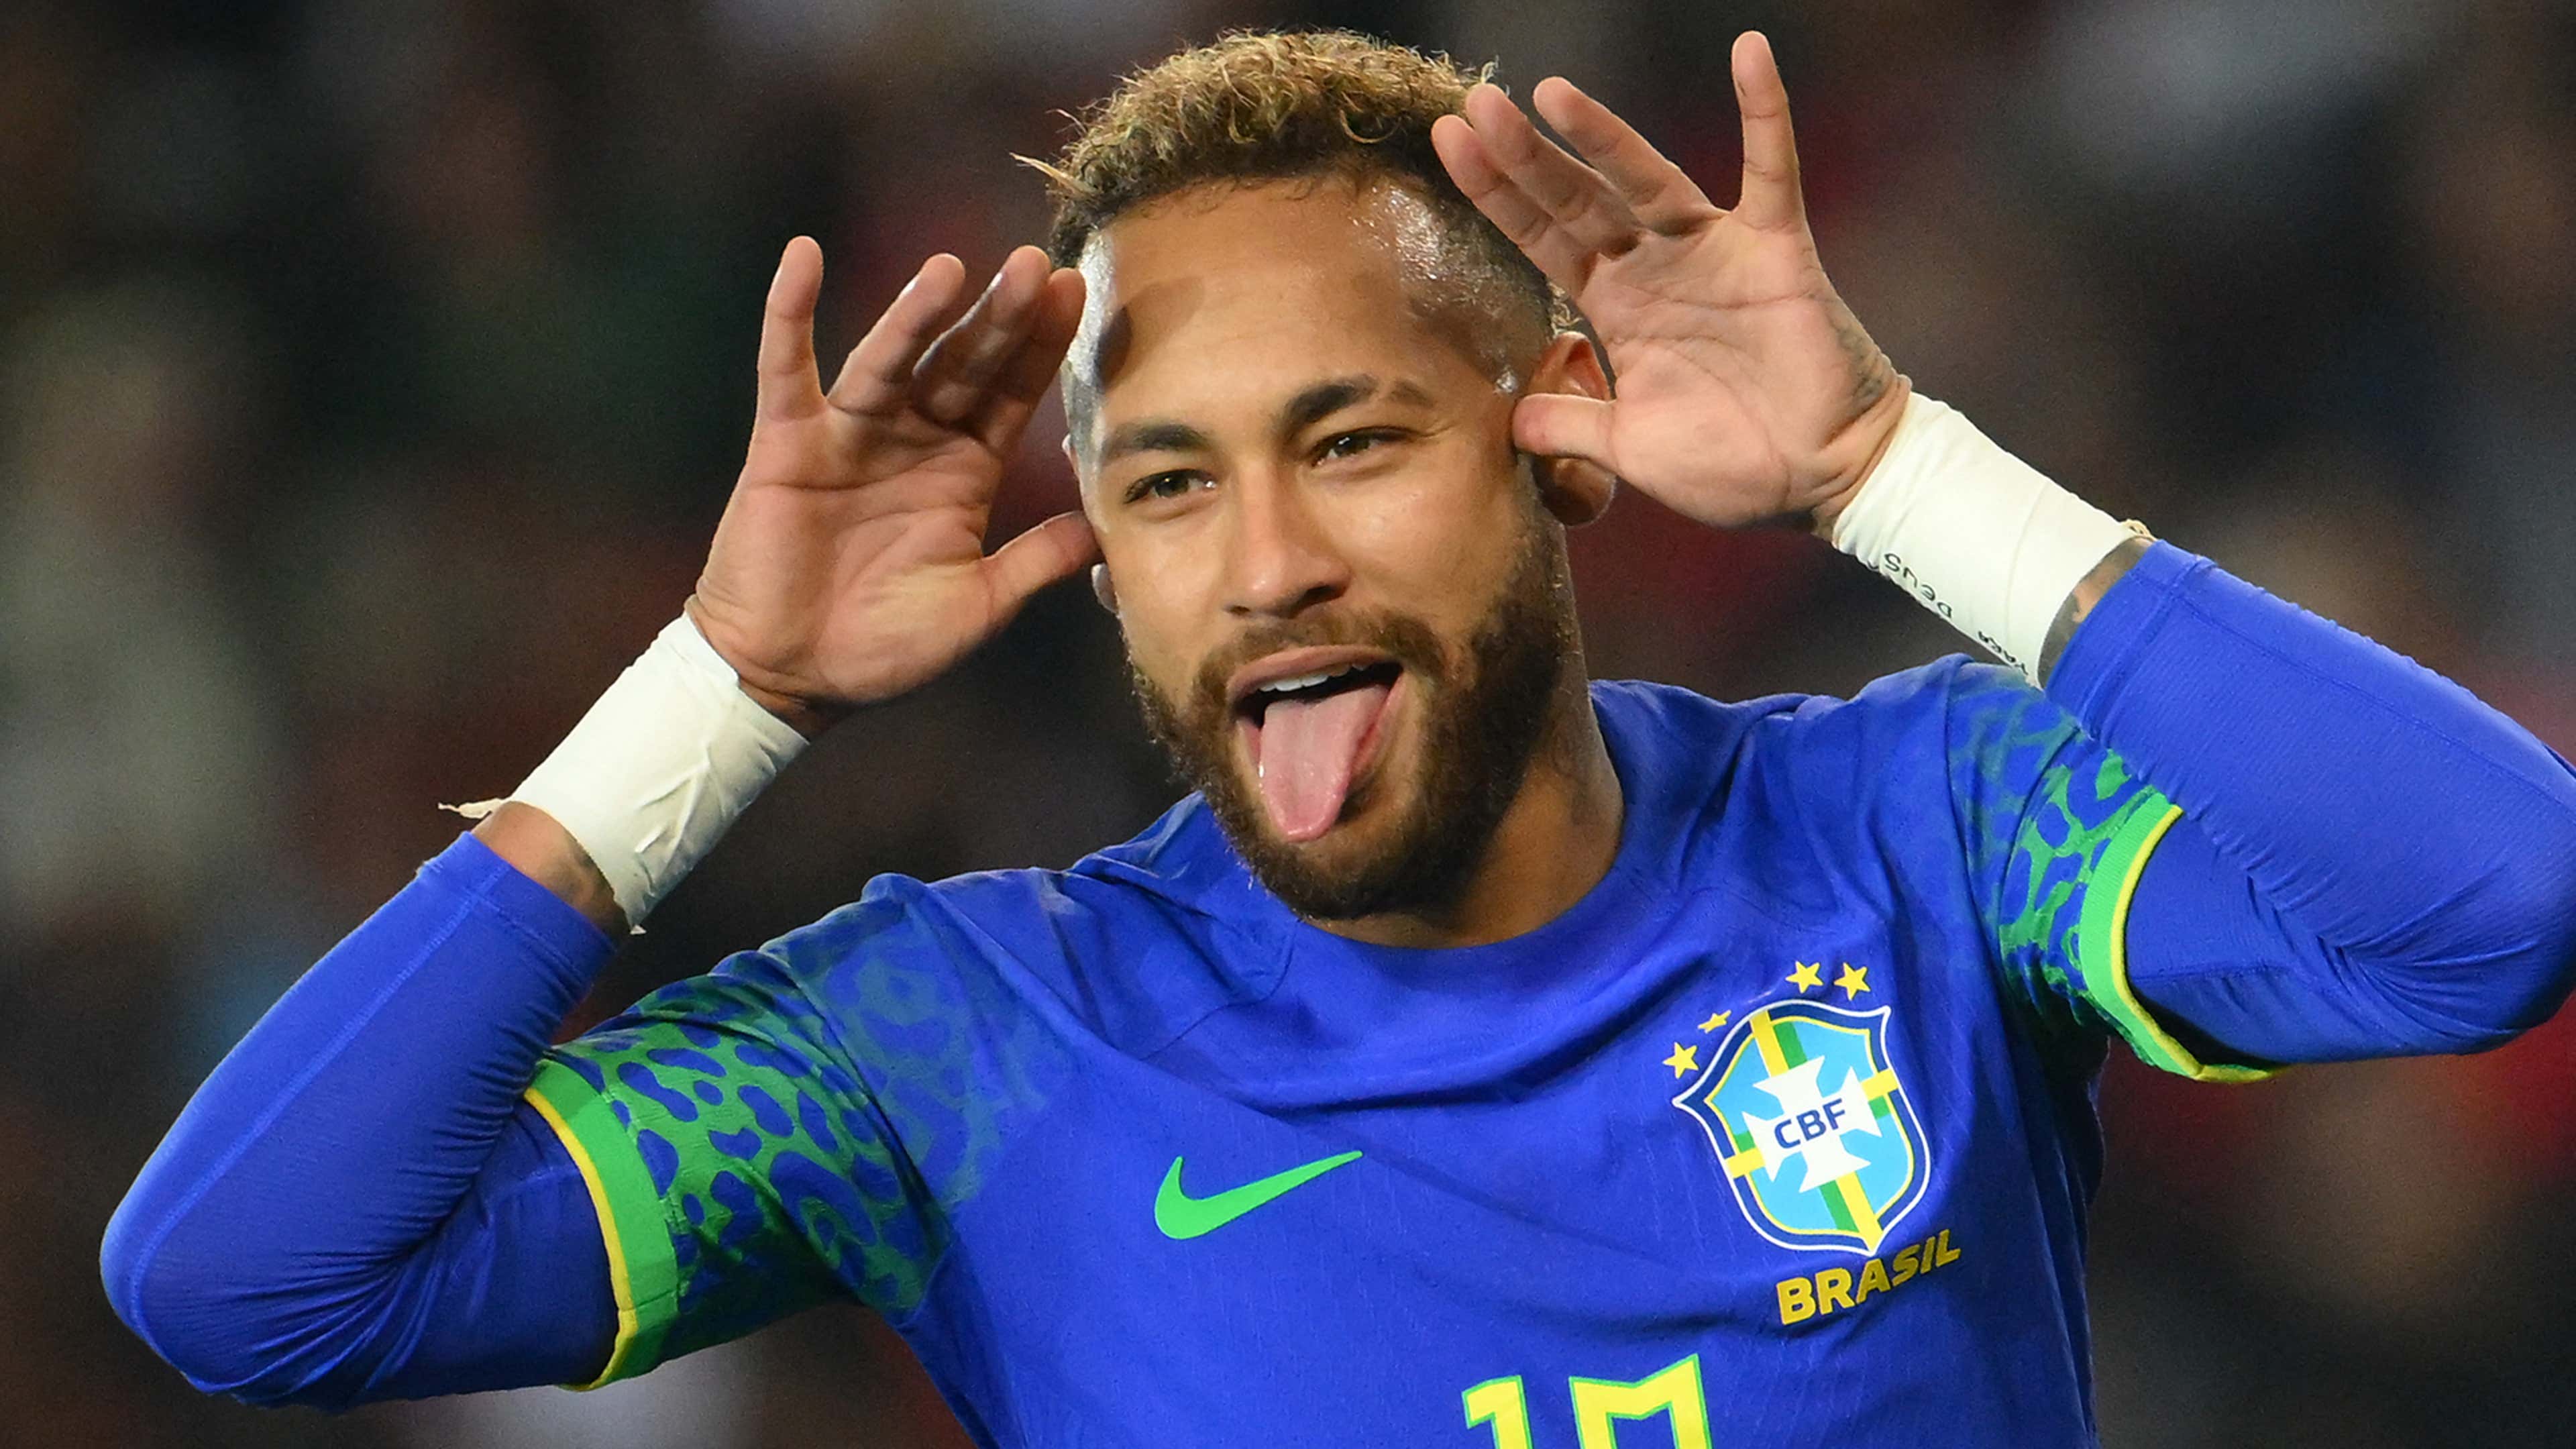 Like it or not, Neymar is an ace' – Brazil star backed by Richarlison to illuminate 2022 World Cup | Goal.com